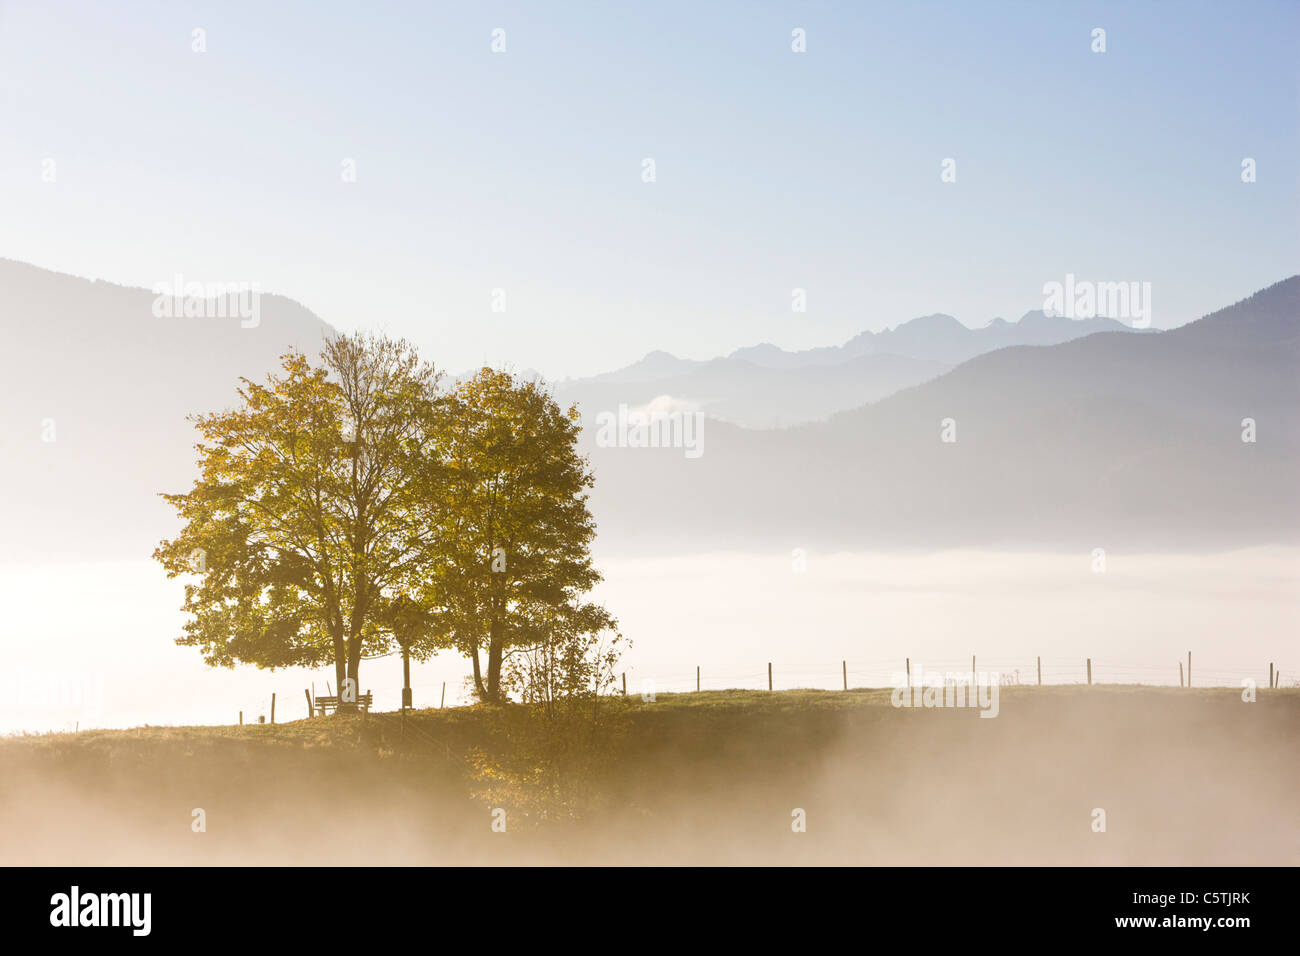 Germany, Bavaria, Fog over landscape, the Alps in background Stock Photo